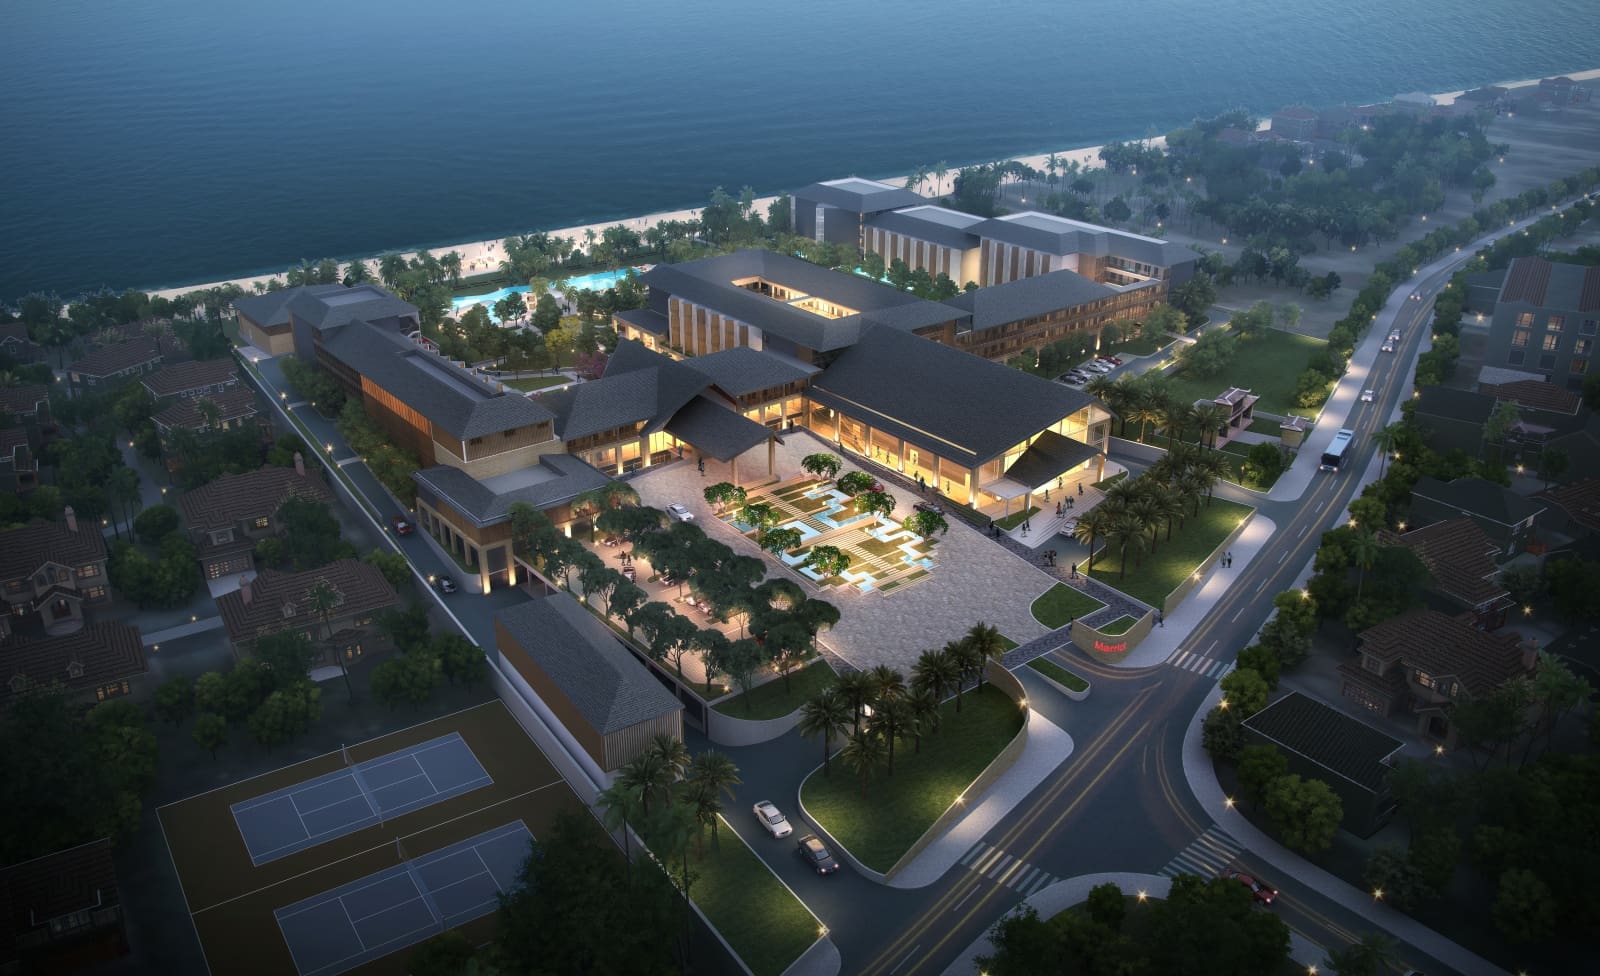 rendered image of aerial view of the Marriott in Hoi An